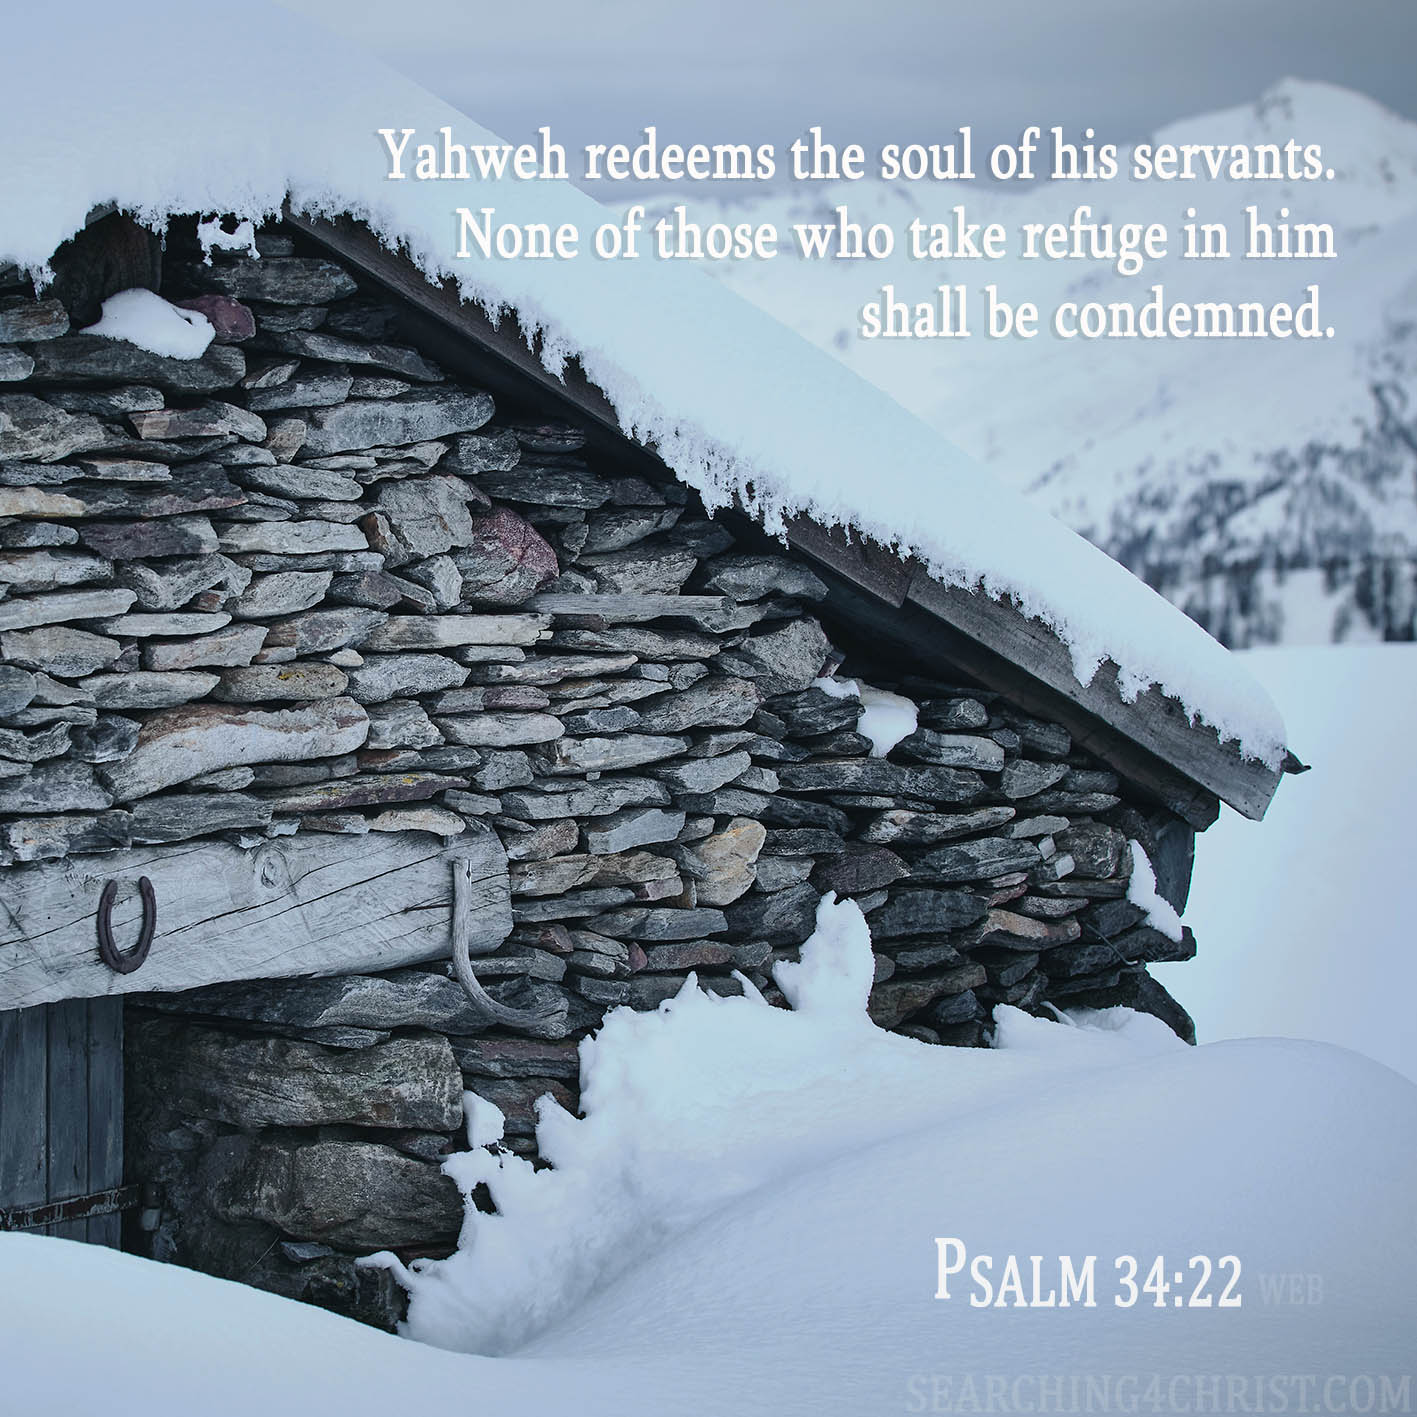 Yahweh redeems the soul of his servants. None of those who take refuge in him shall be condemned. Psalm 34:22